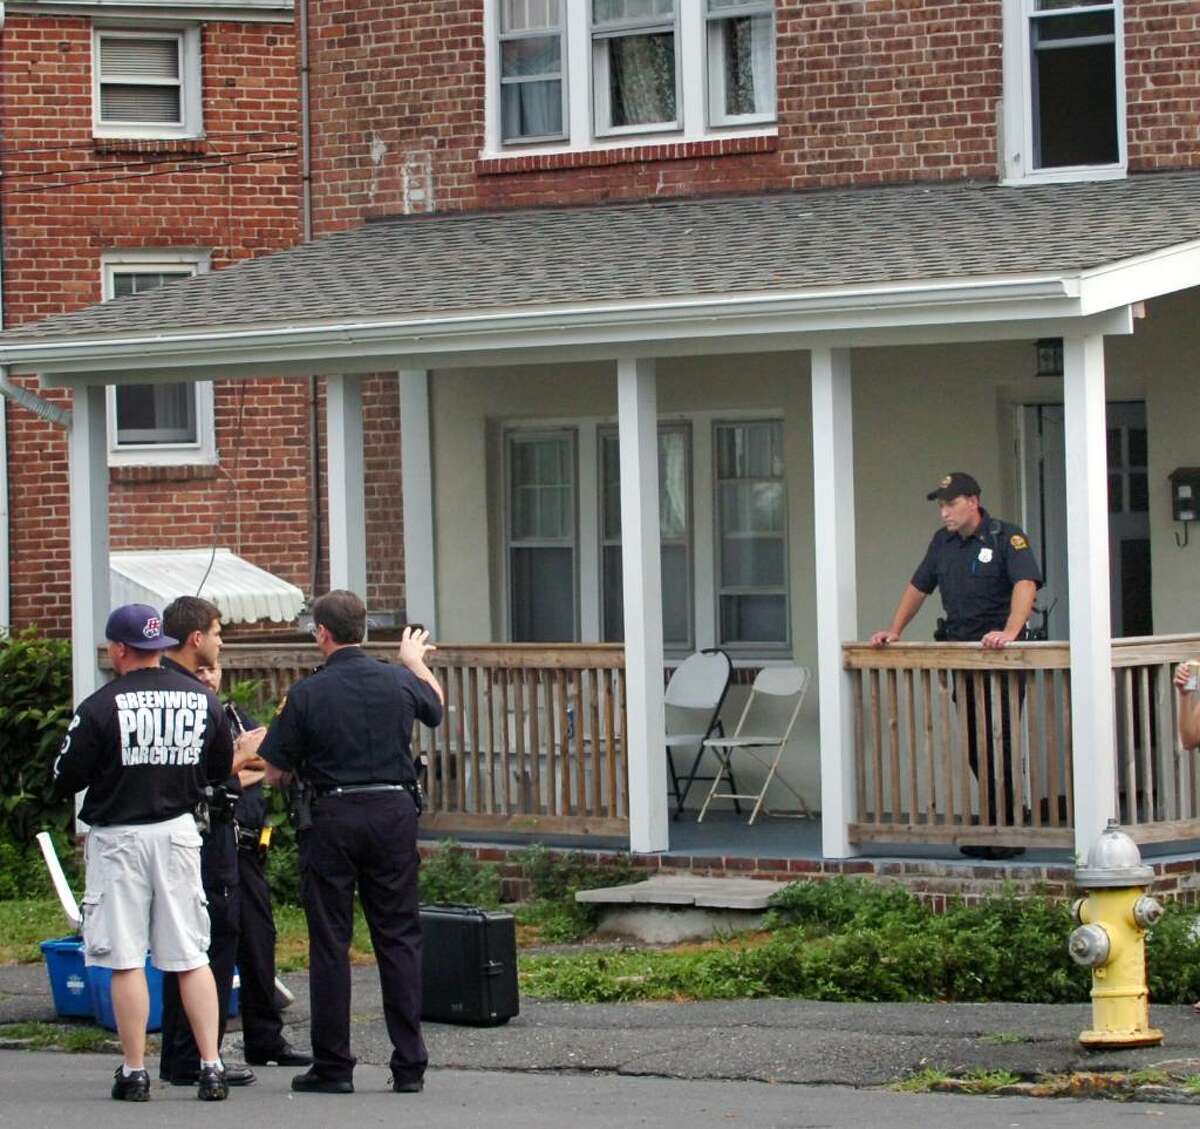 Greenwich police outside of 104 Pemberwick Road in the Pemberwick section of Greenwich, where two people were arrested for possession of marijuana, early Wednesday evening, July 14, 2010.